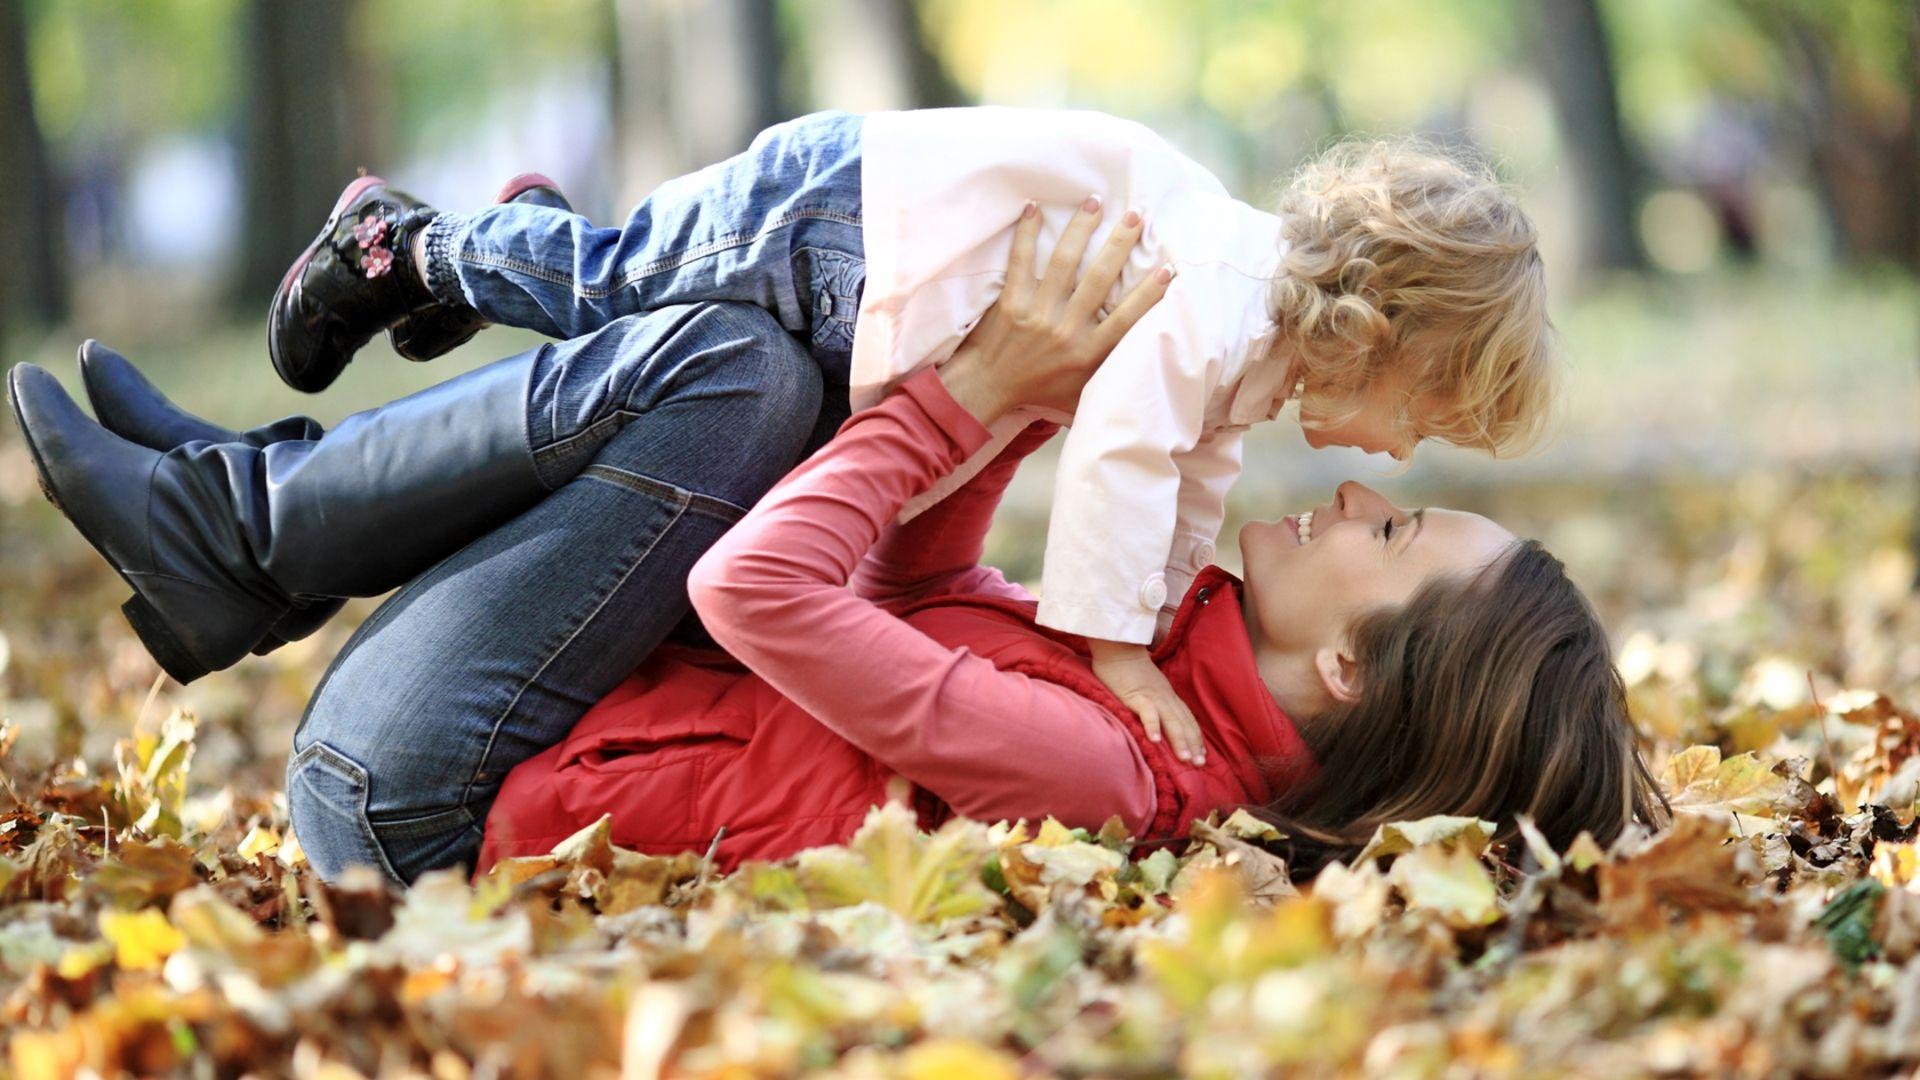 Download Wallpaper 1920x1080 mother, child, leaves, autumn Full HD